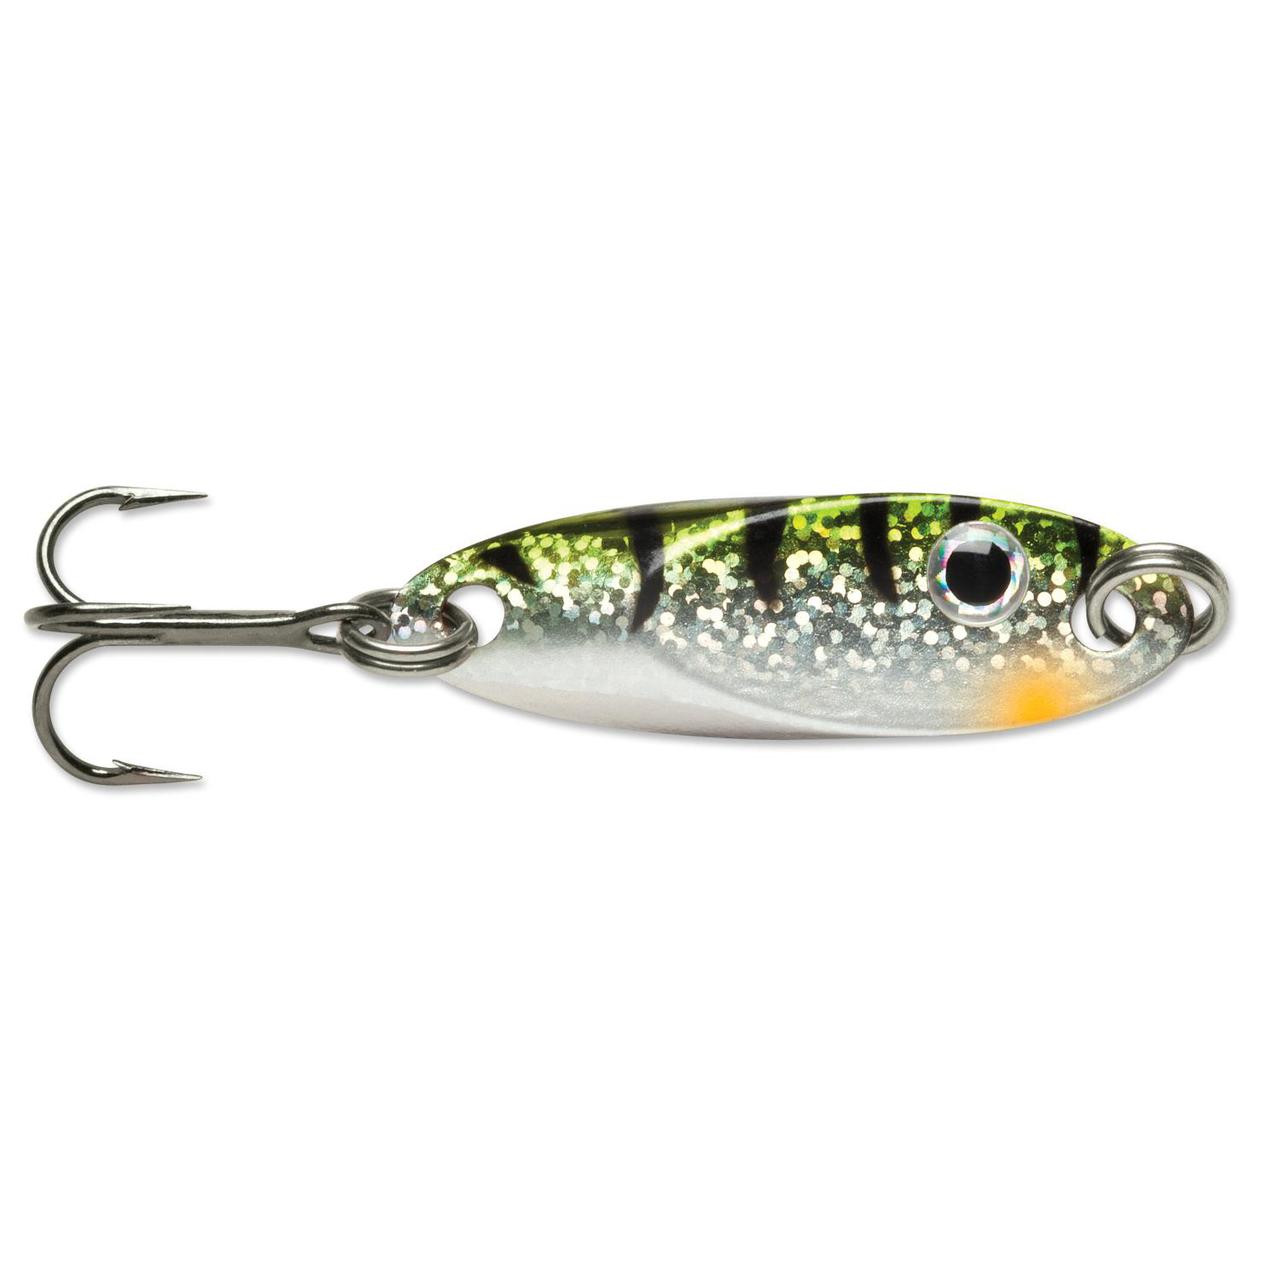 VMC Flash Champ Spoons from